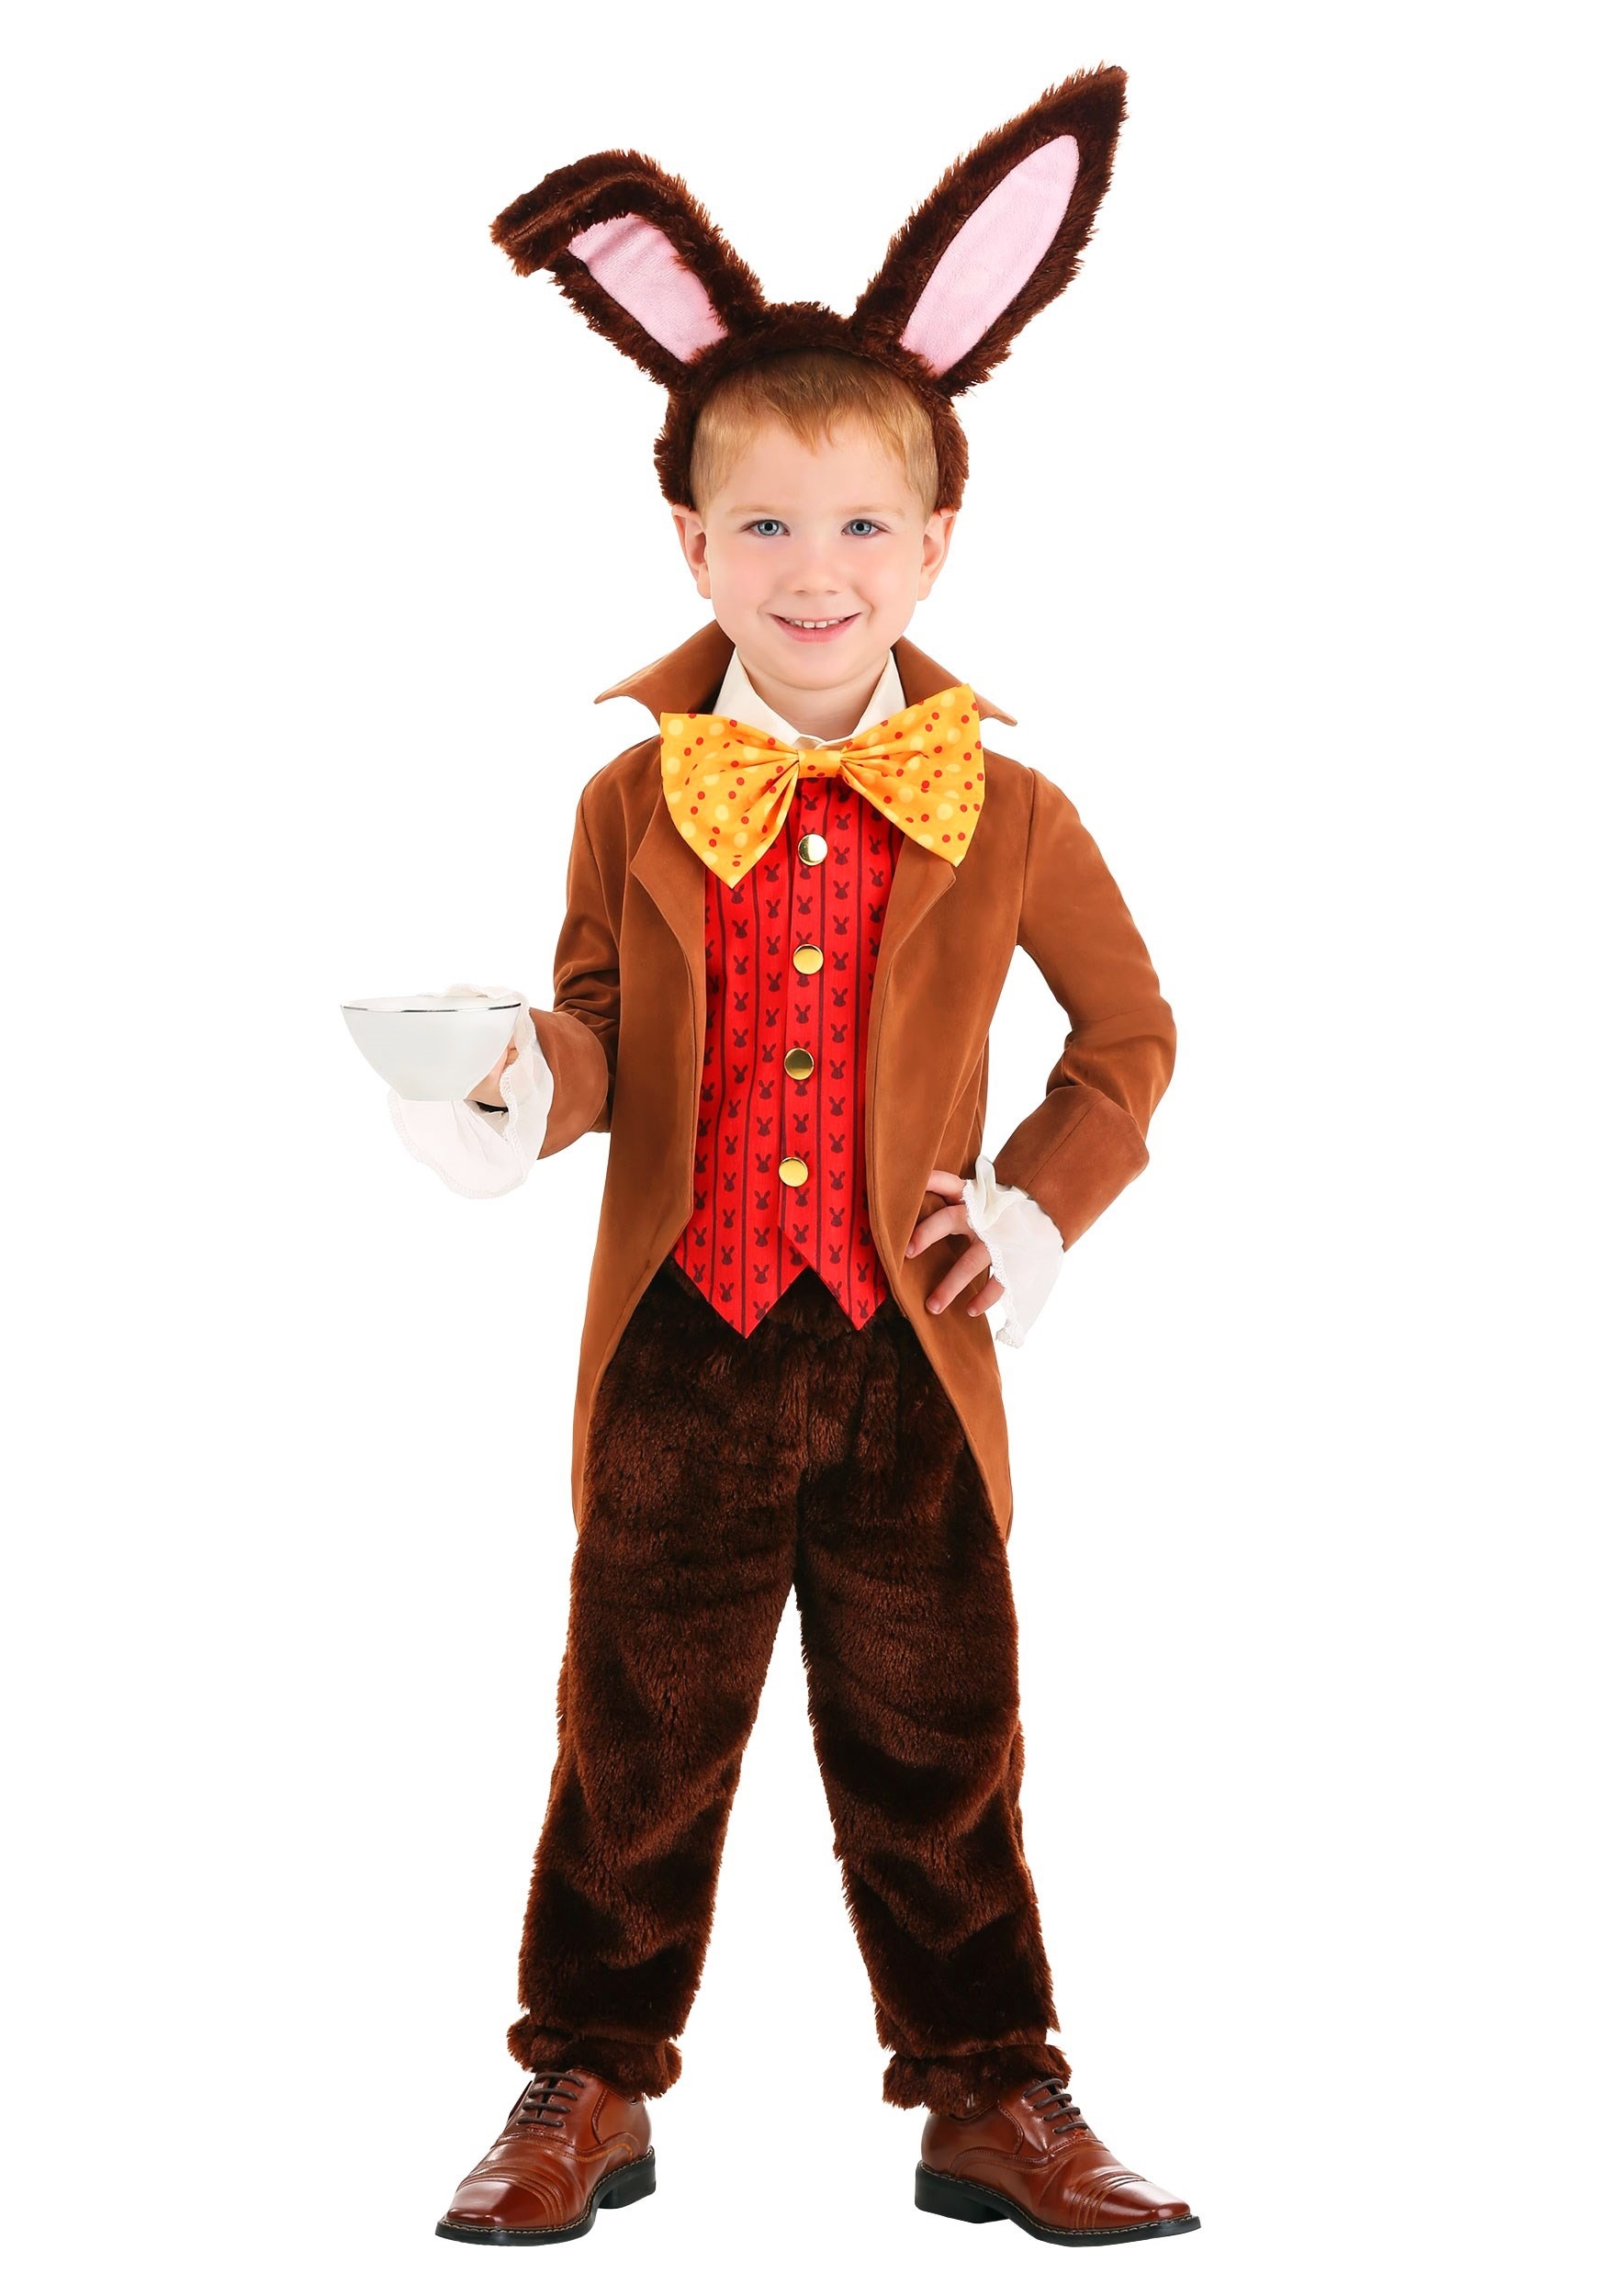 Toddler’s Tea Time March Hare Costume